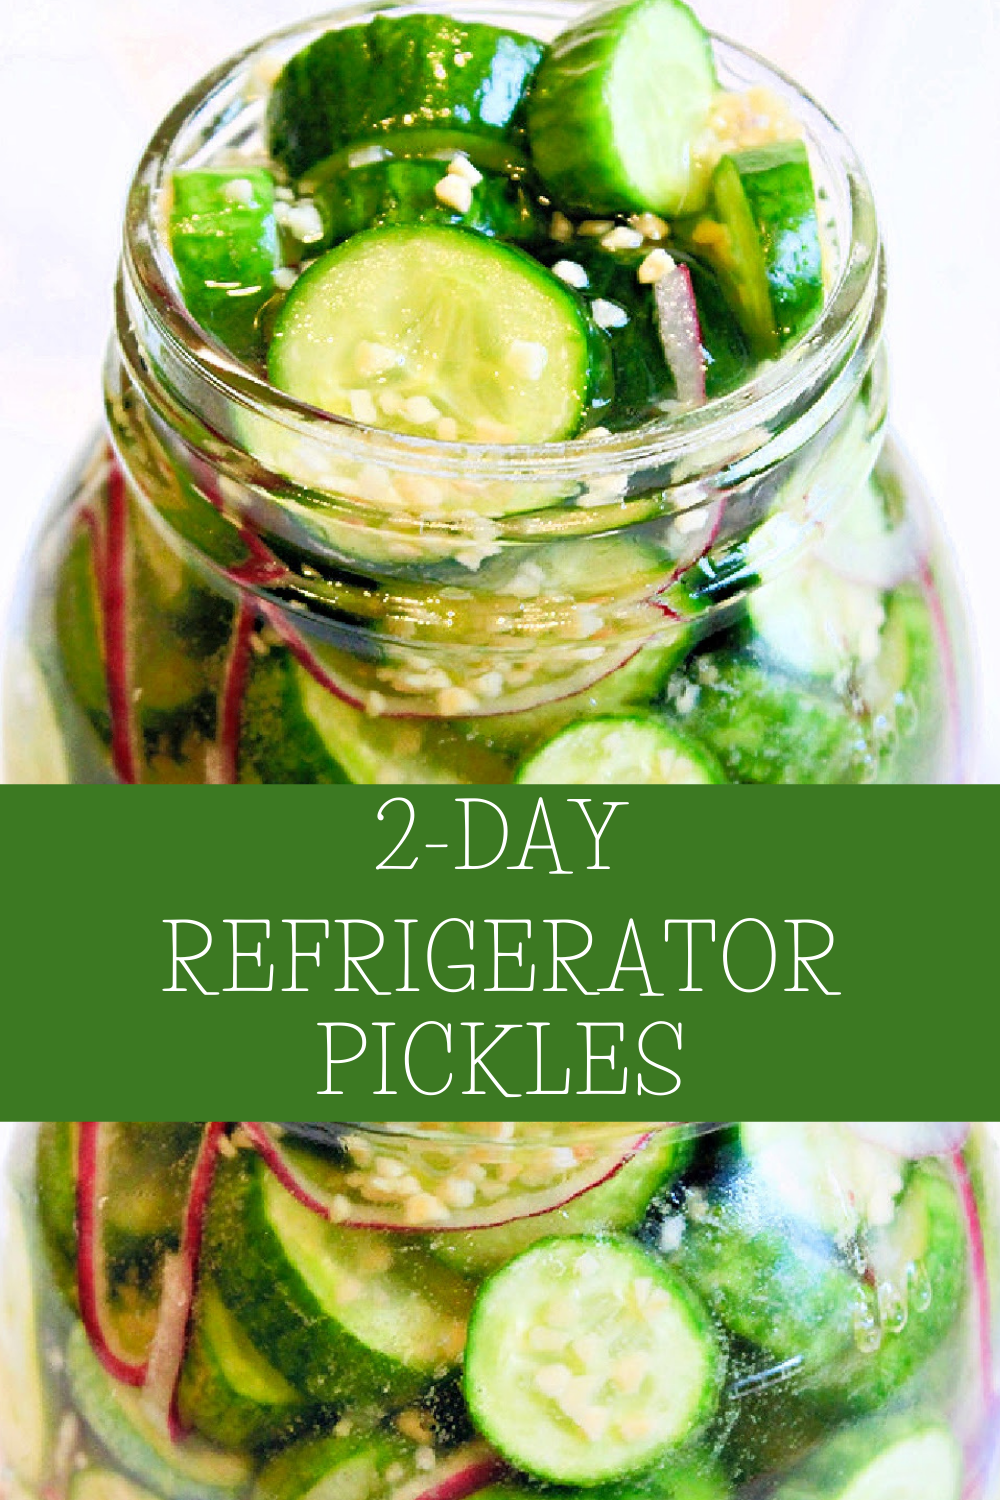 Refrigerator Pickles are quick and easy to make with 6 simple ingredients. No cooking or canning equipment needed. Ready to enjoy in just 2 days! via @thiswifecooks